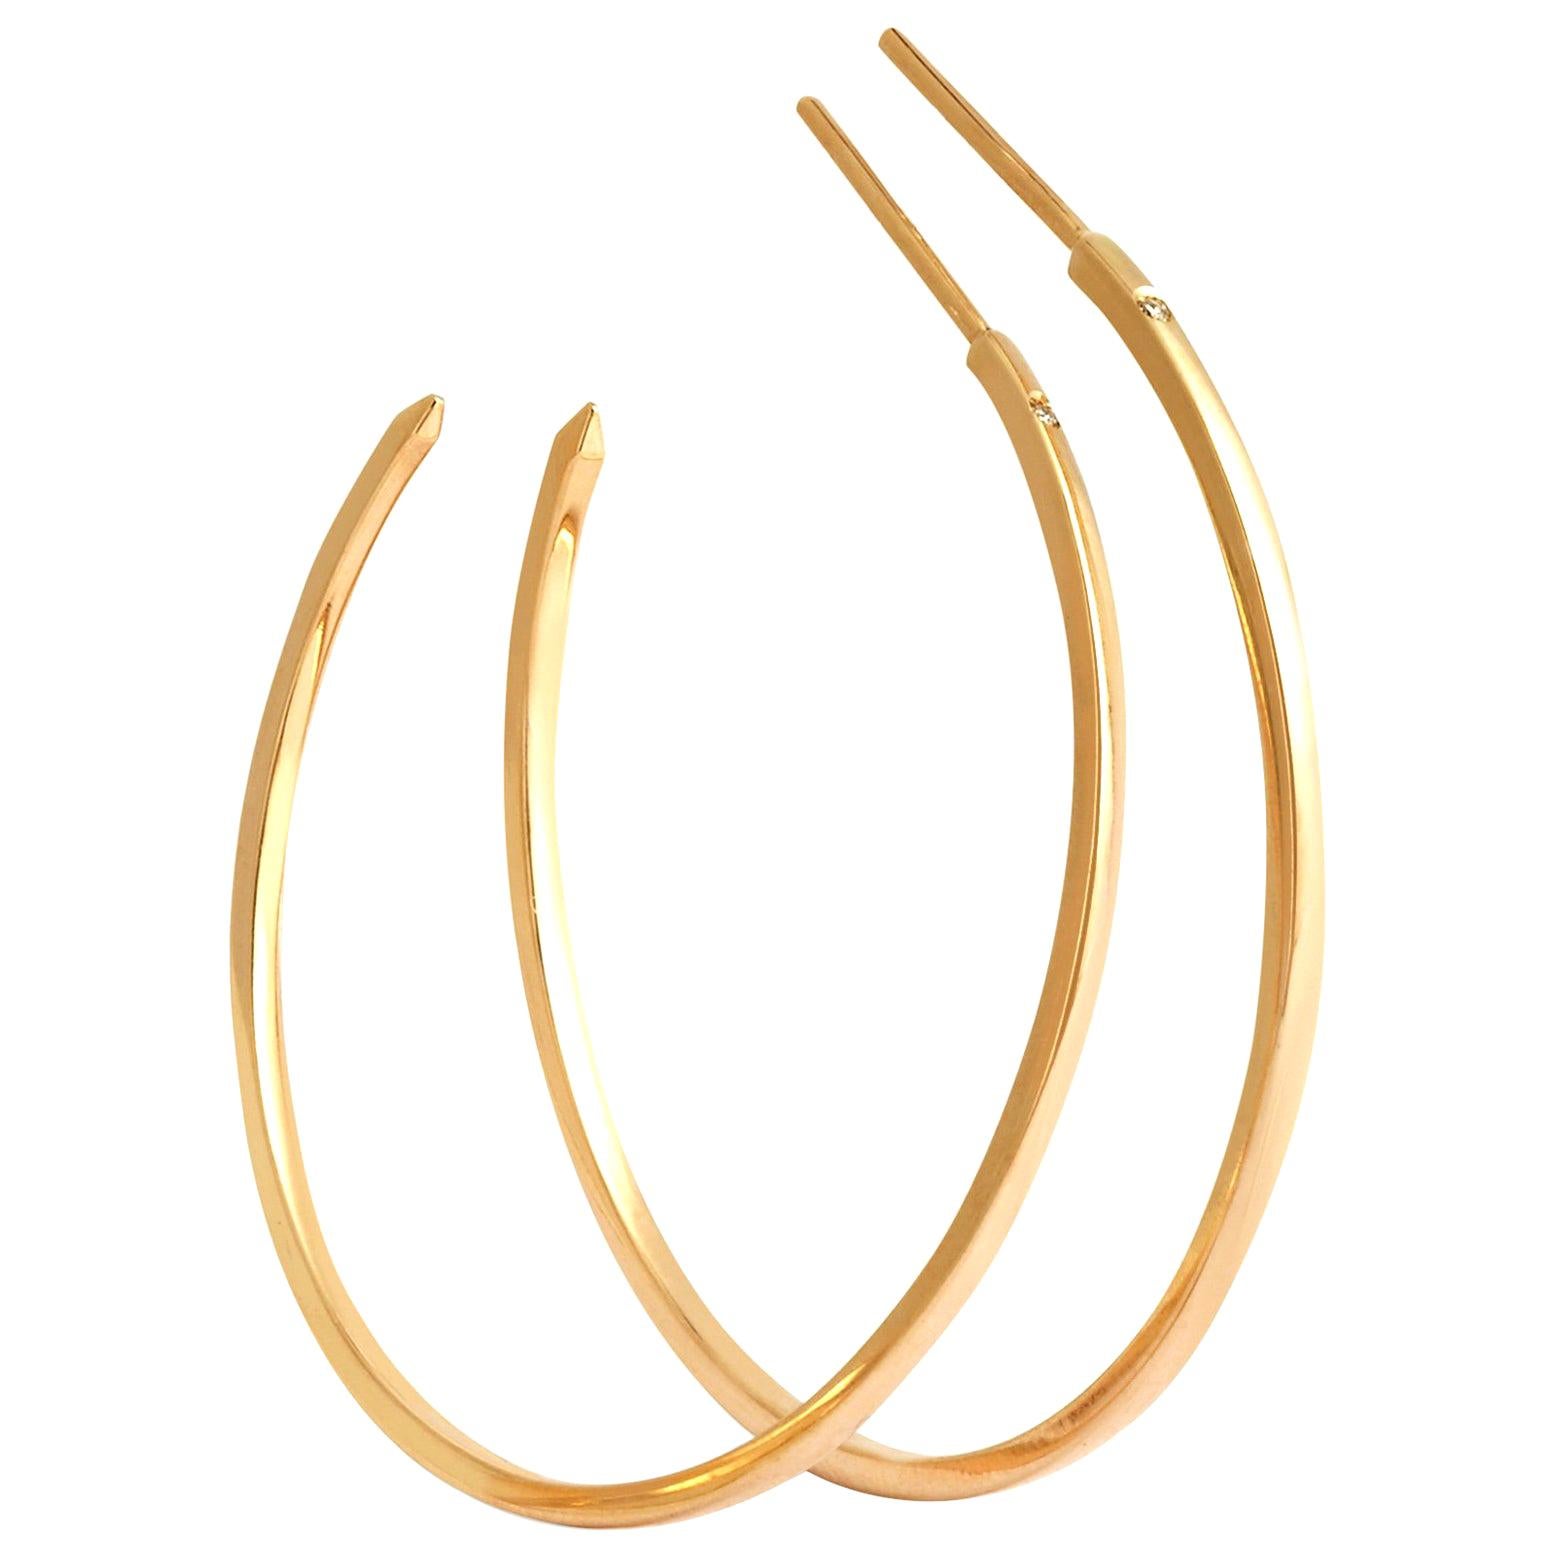 Hoop Earrings in Yellow Gold with White Diamonds by Allison Bryan